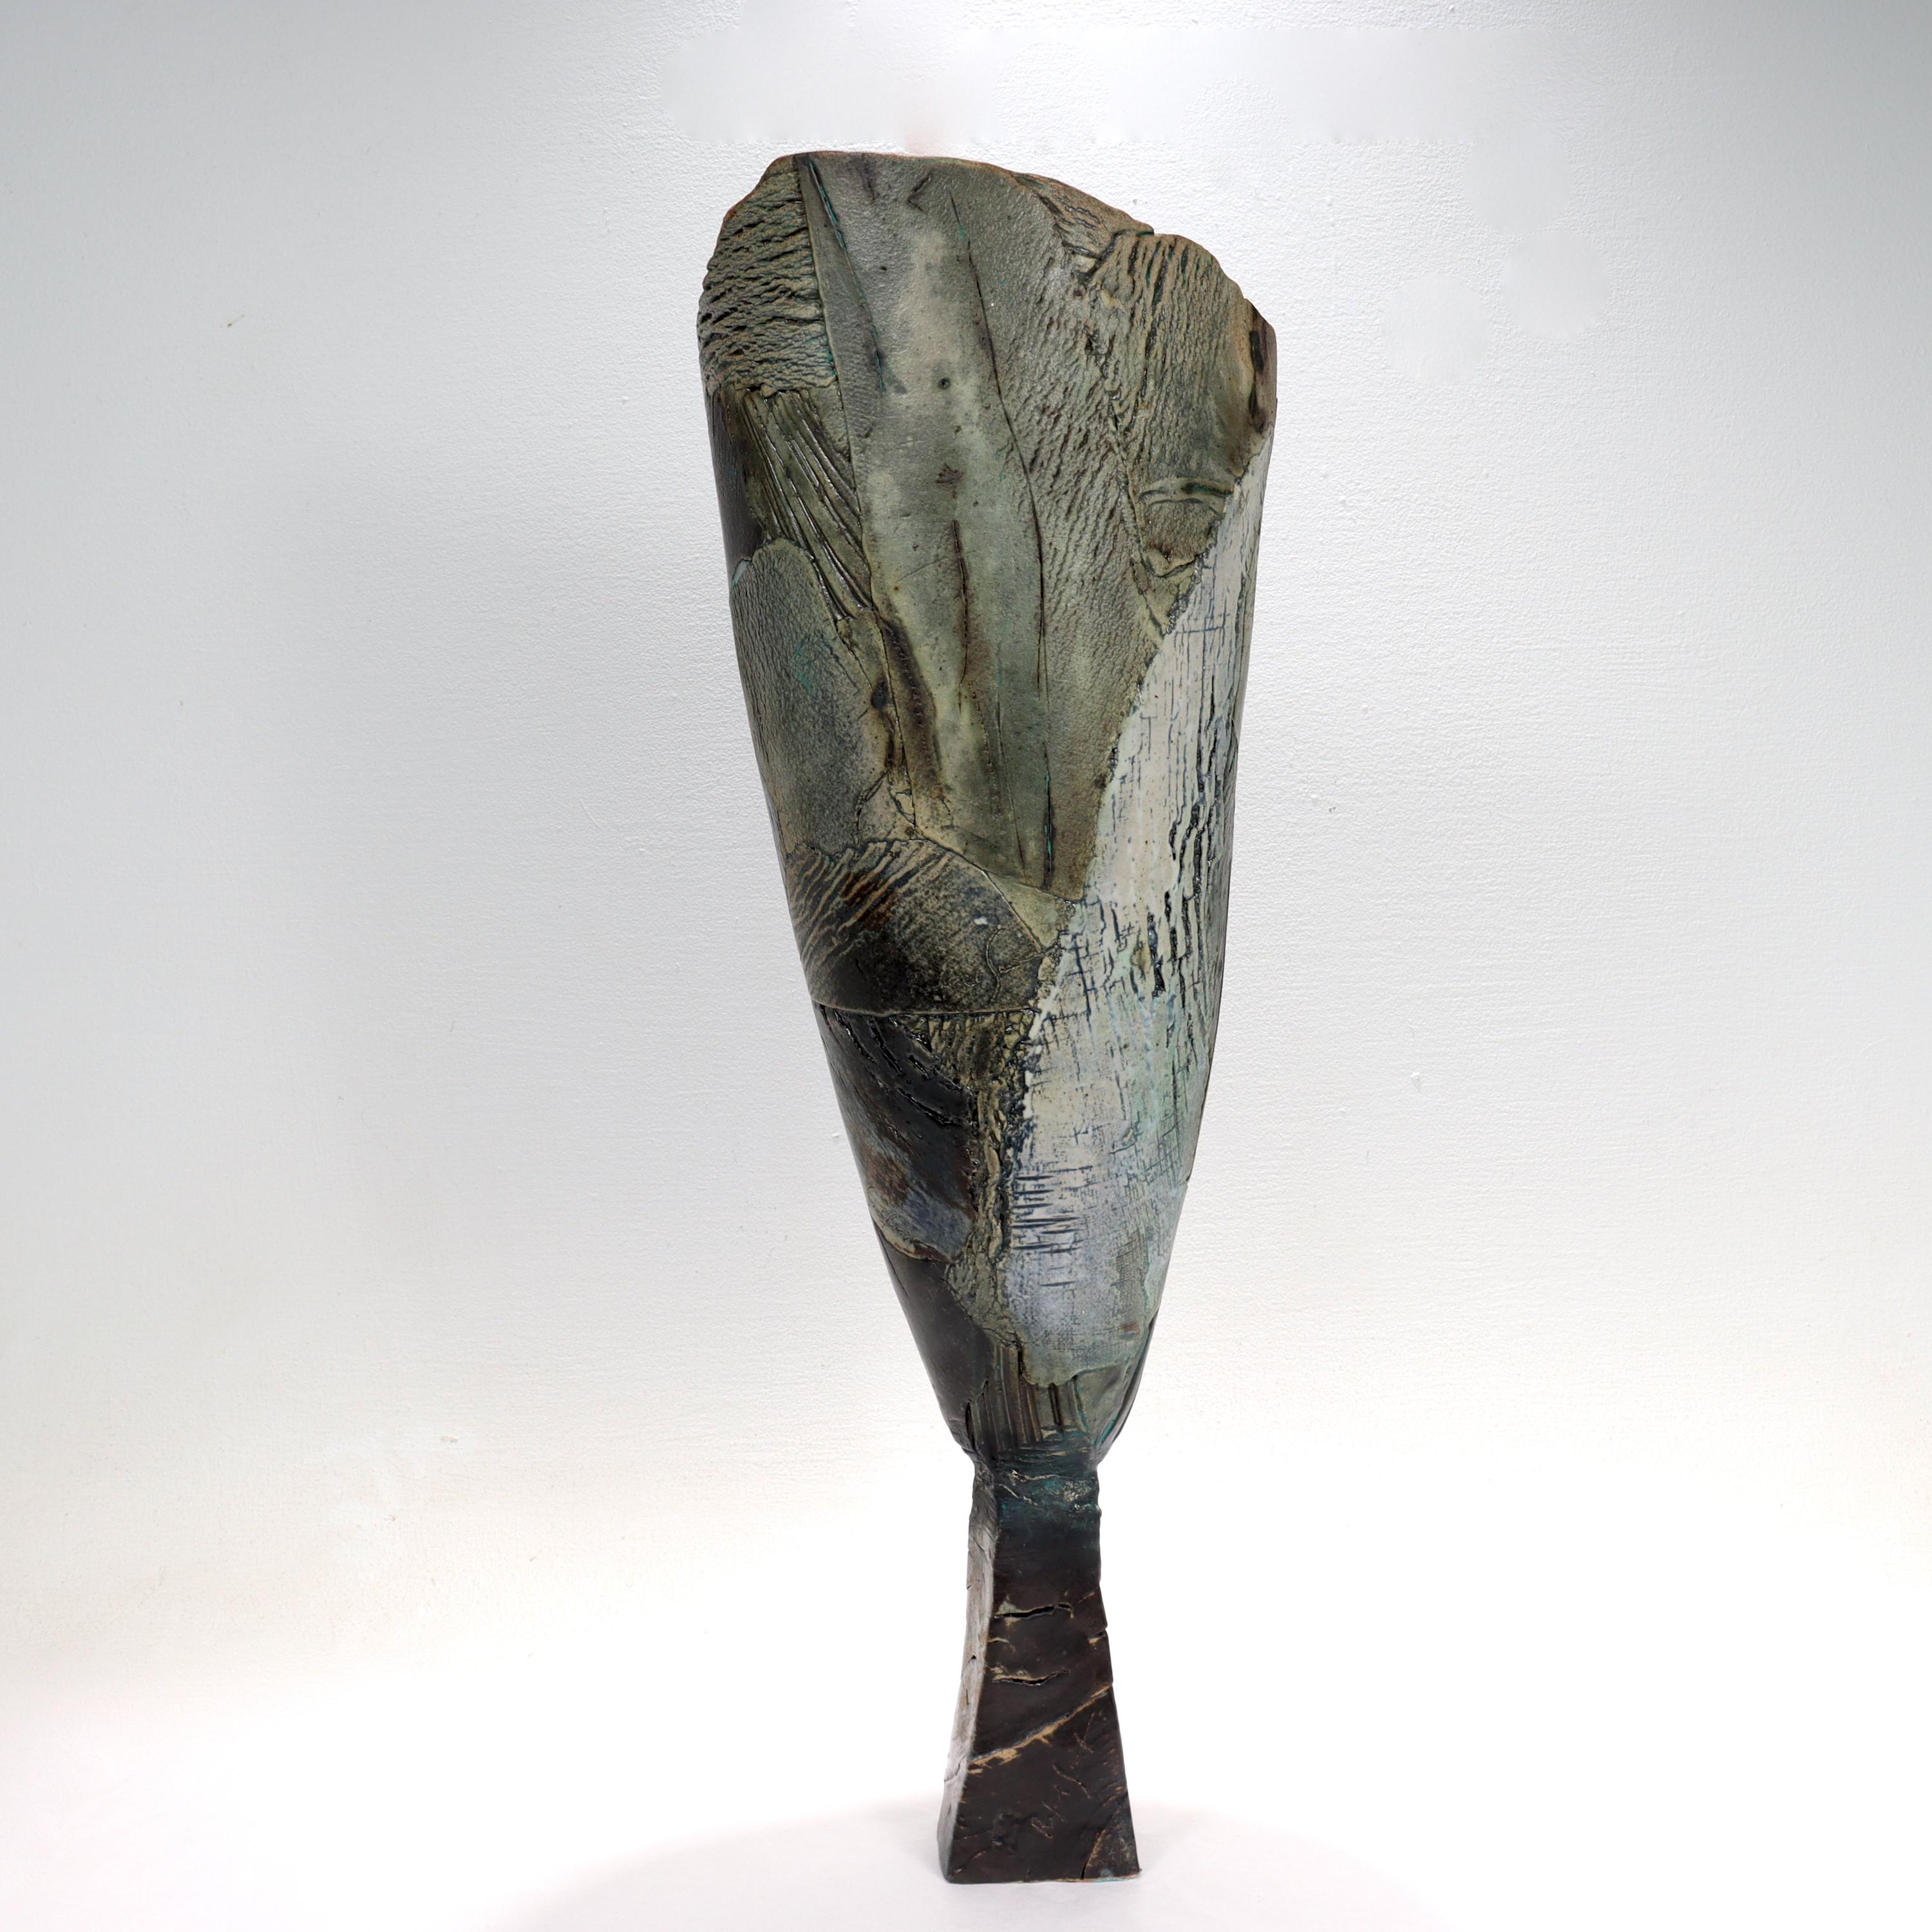 Large Modernist Signed Art Pottery Vase by Rafael Saifulin In Good Condition For Sale In Philadelphia, PA